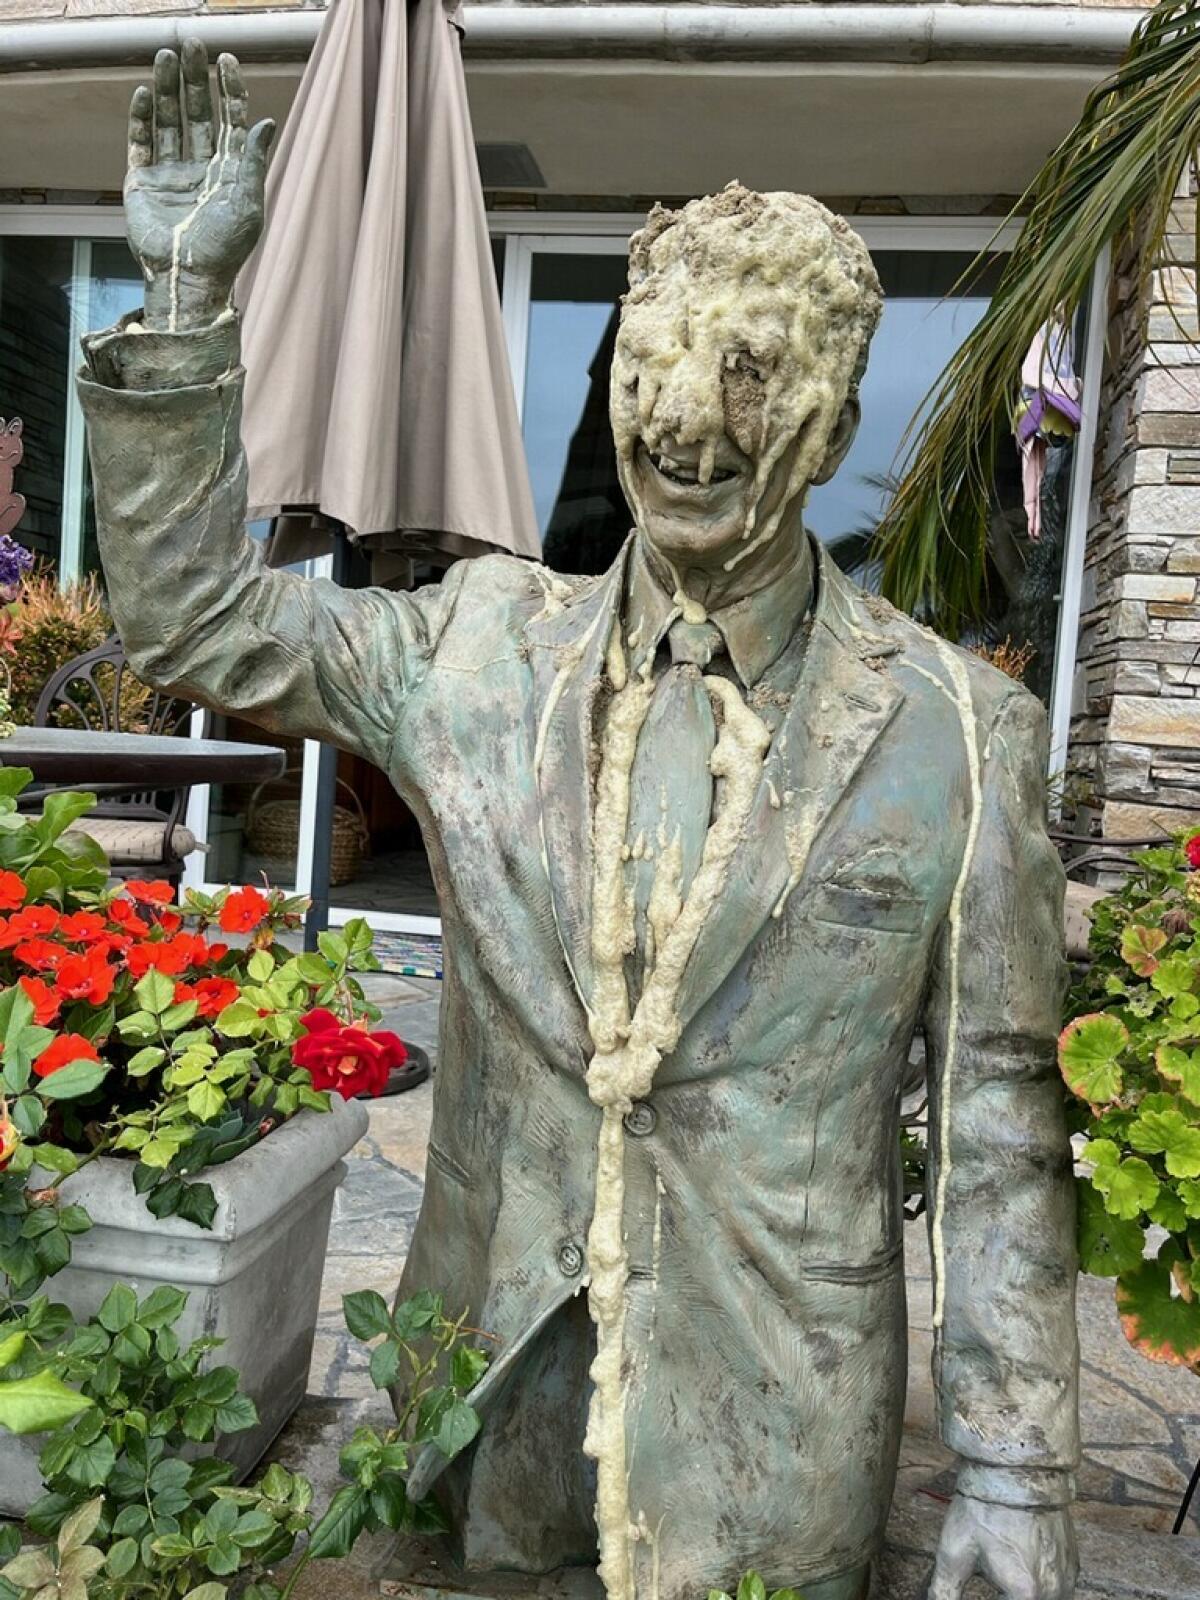 The vandalized sculpture of Ronald Reagan at Miriam Baker’s home.